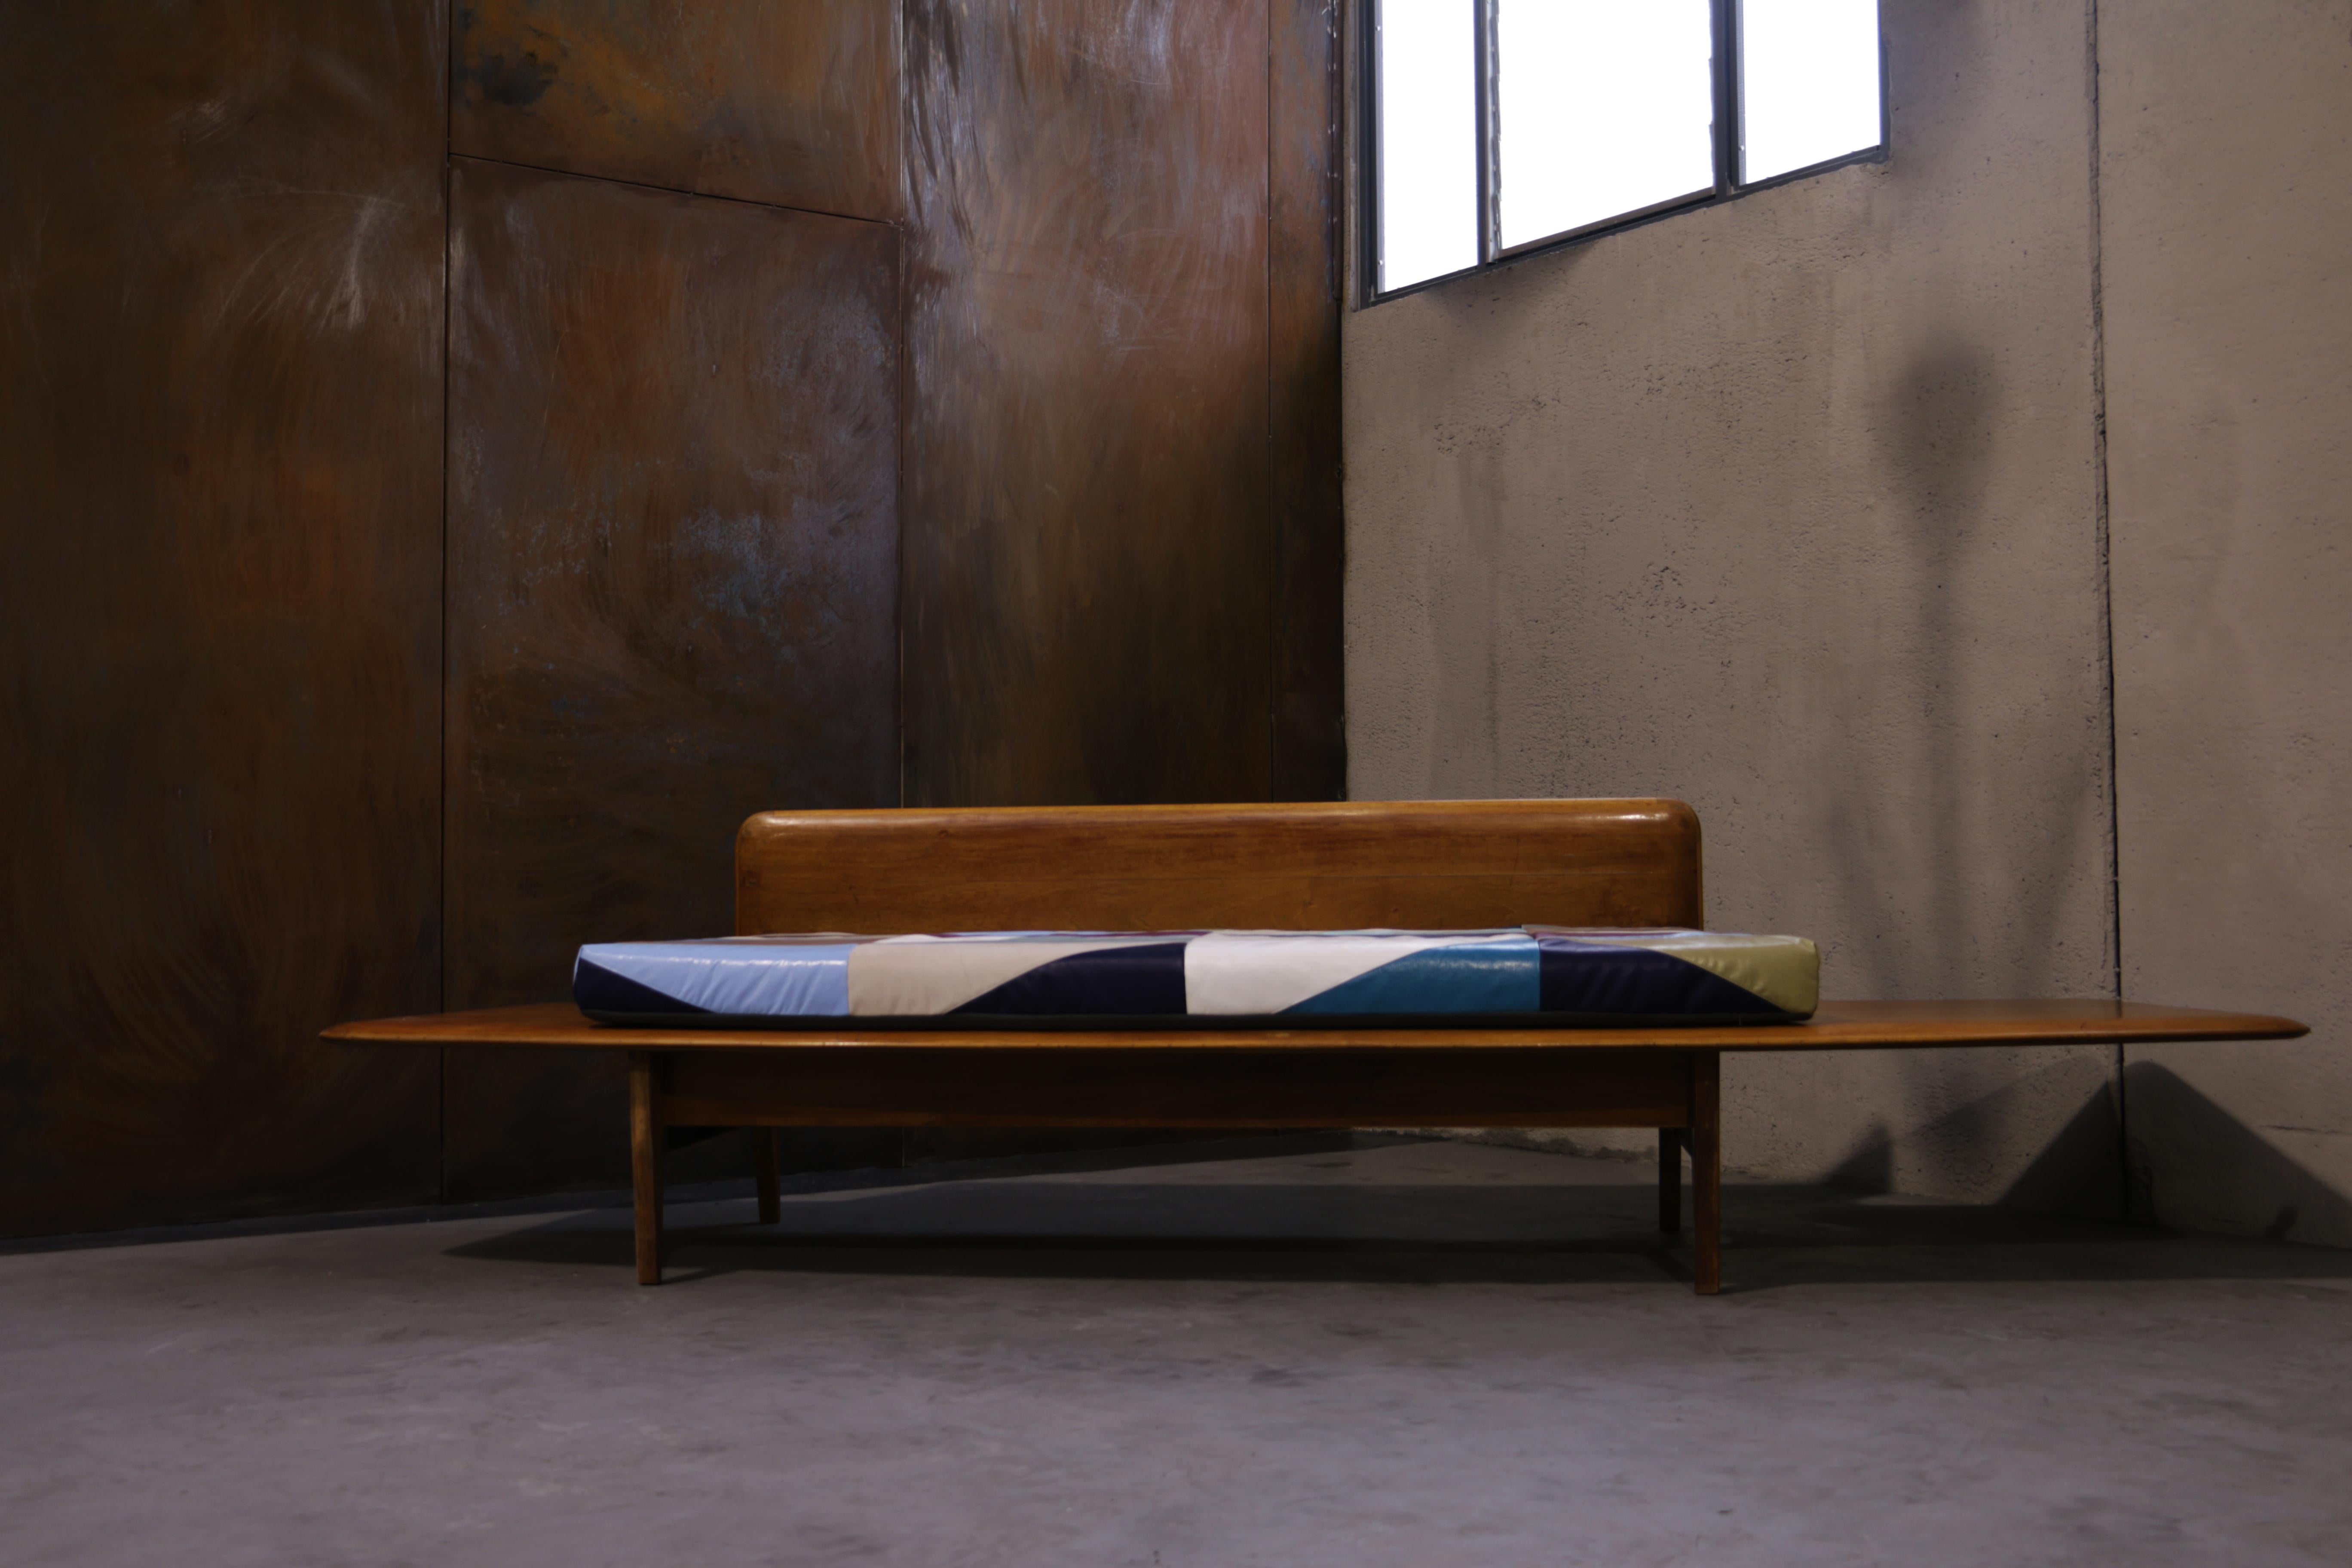 Recycled wood or recycled leather.

Daybed sofa made with an Italian headboard 1950 wood attributed to Gio Ponti, with mattress in vintage leather inspired to the Venetian Burano houses colors.